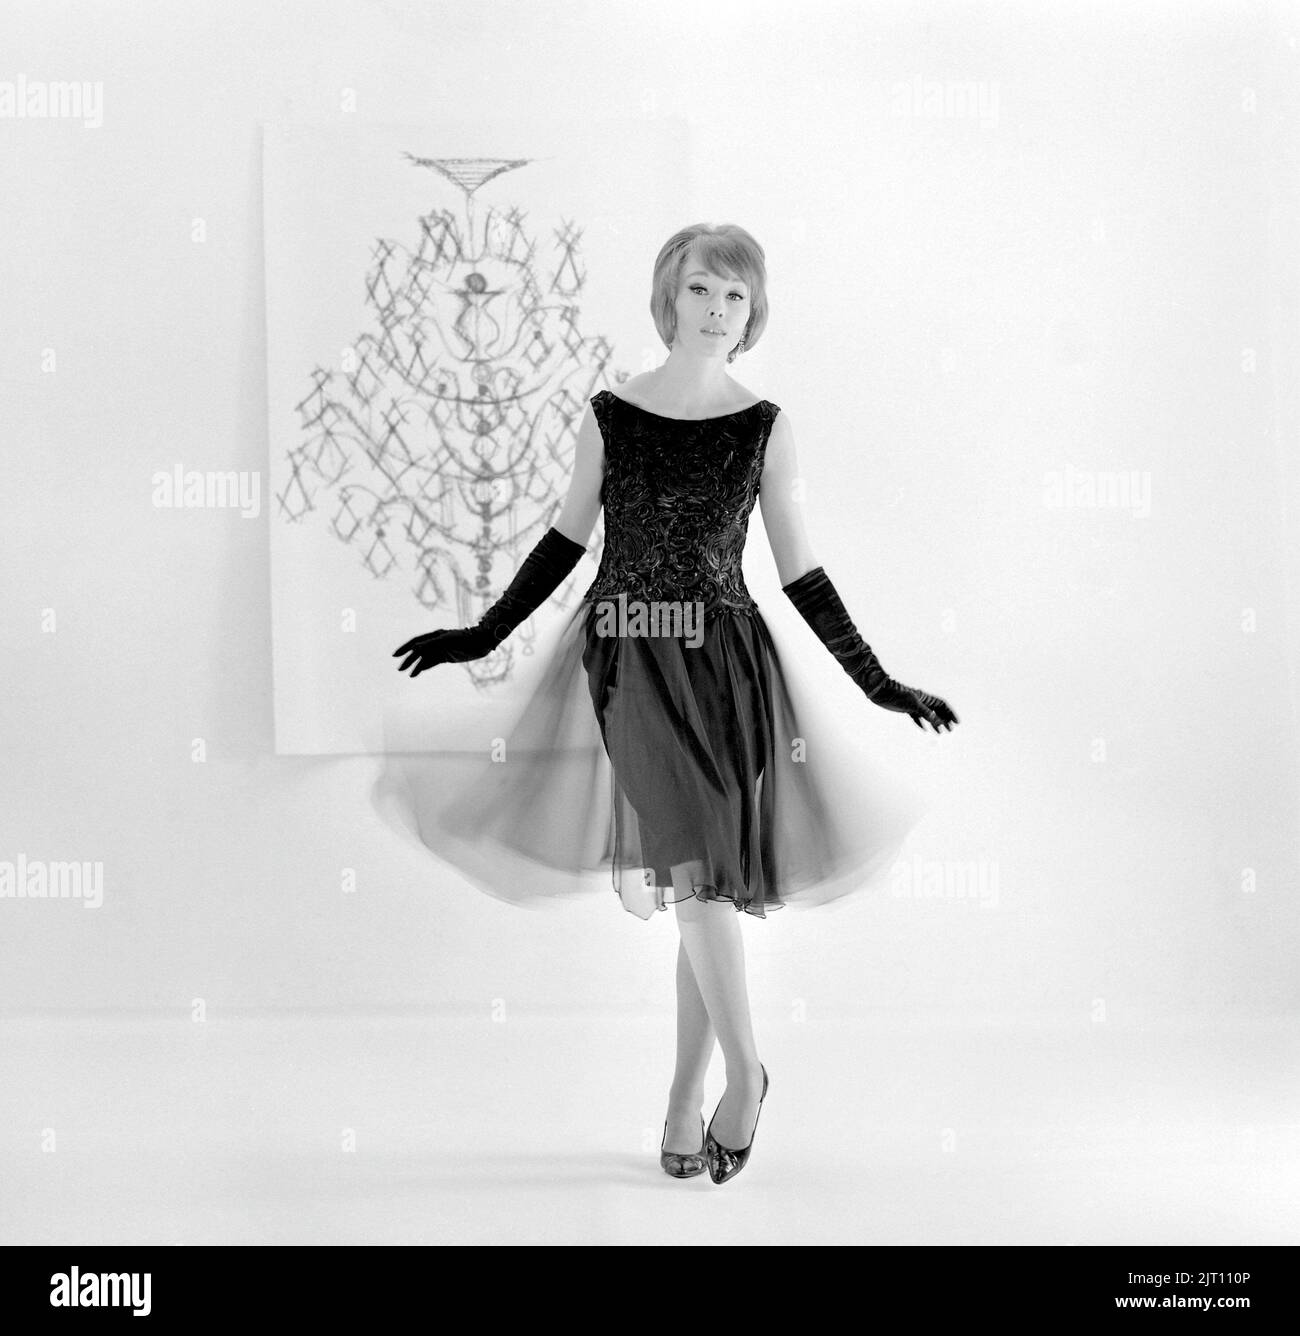 In the 1960s. A fashion model in a typical 1960s dress. Sweden 1960s Stock Photo